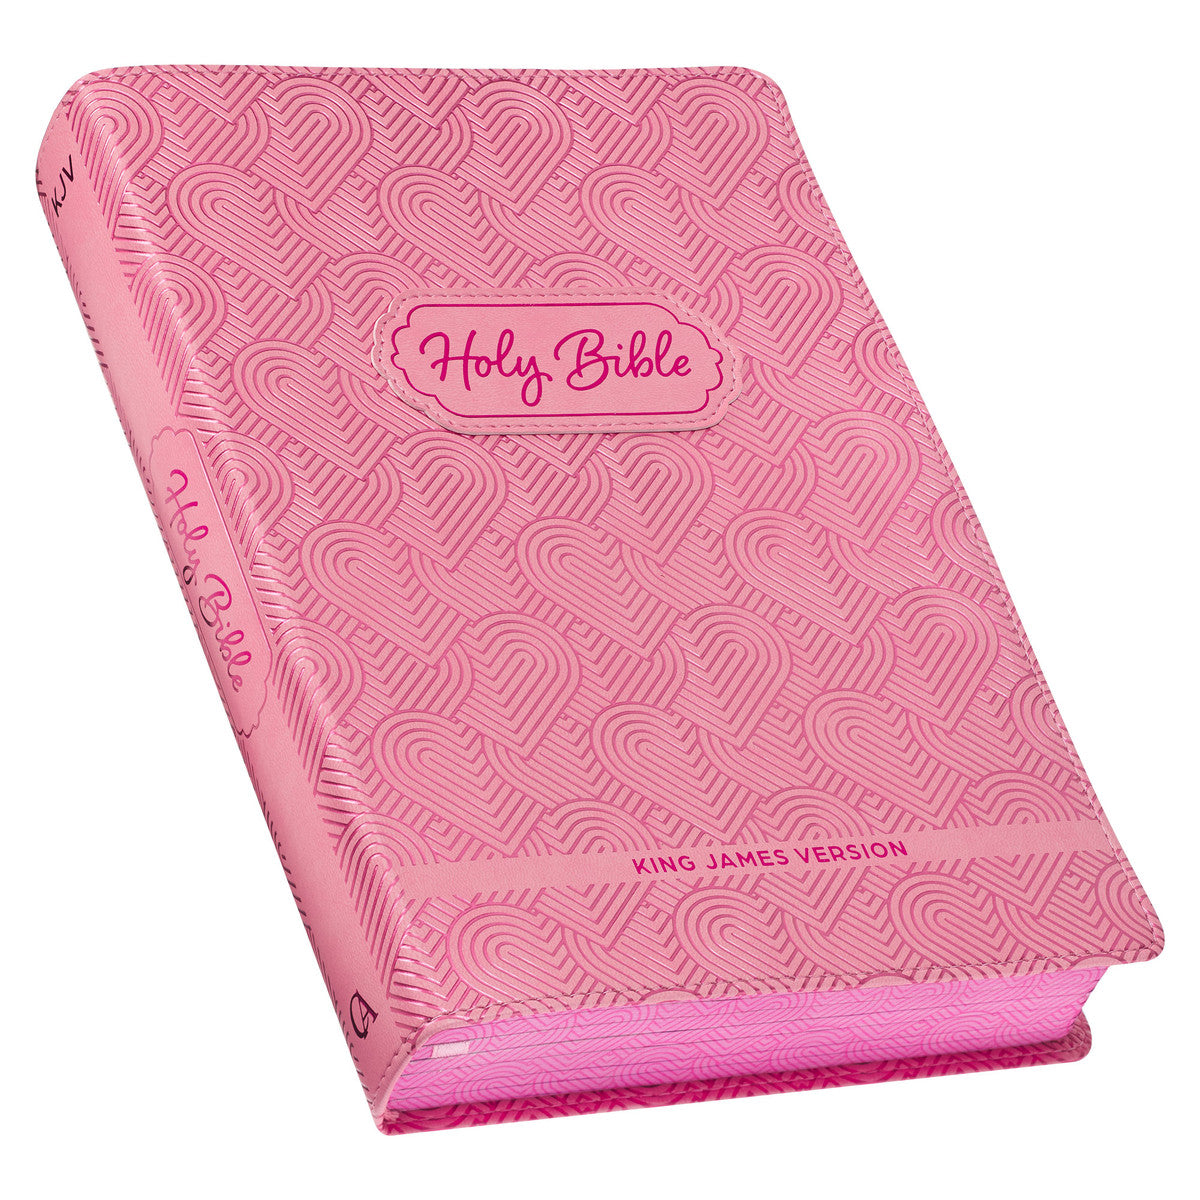 Blossom Pink Heart Faux Leather King James Version Kid's Bible